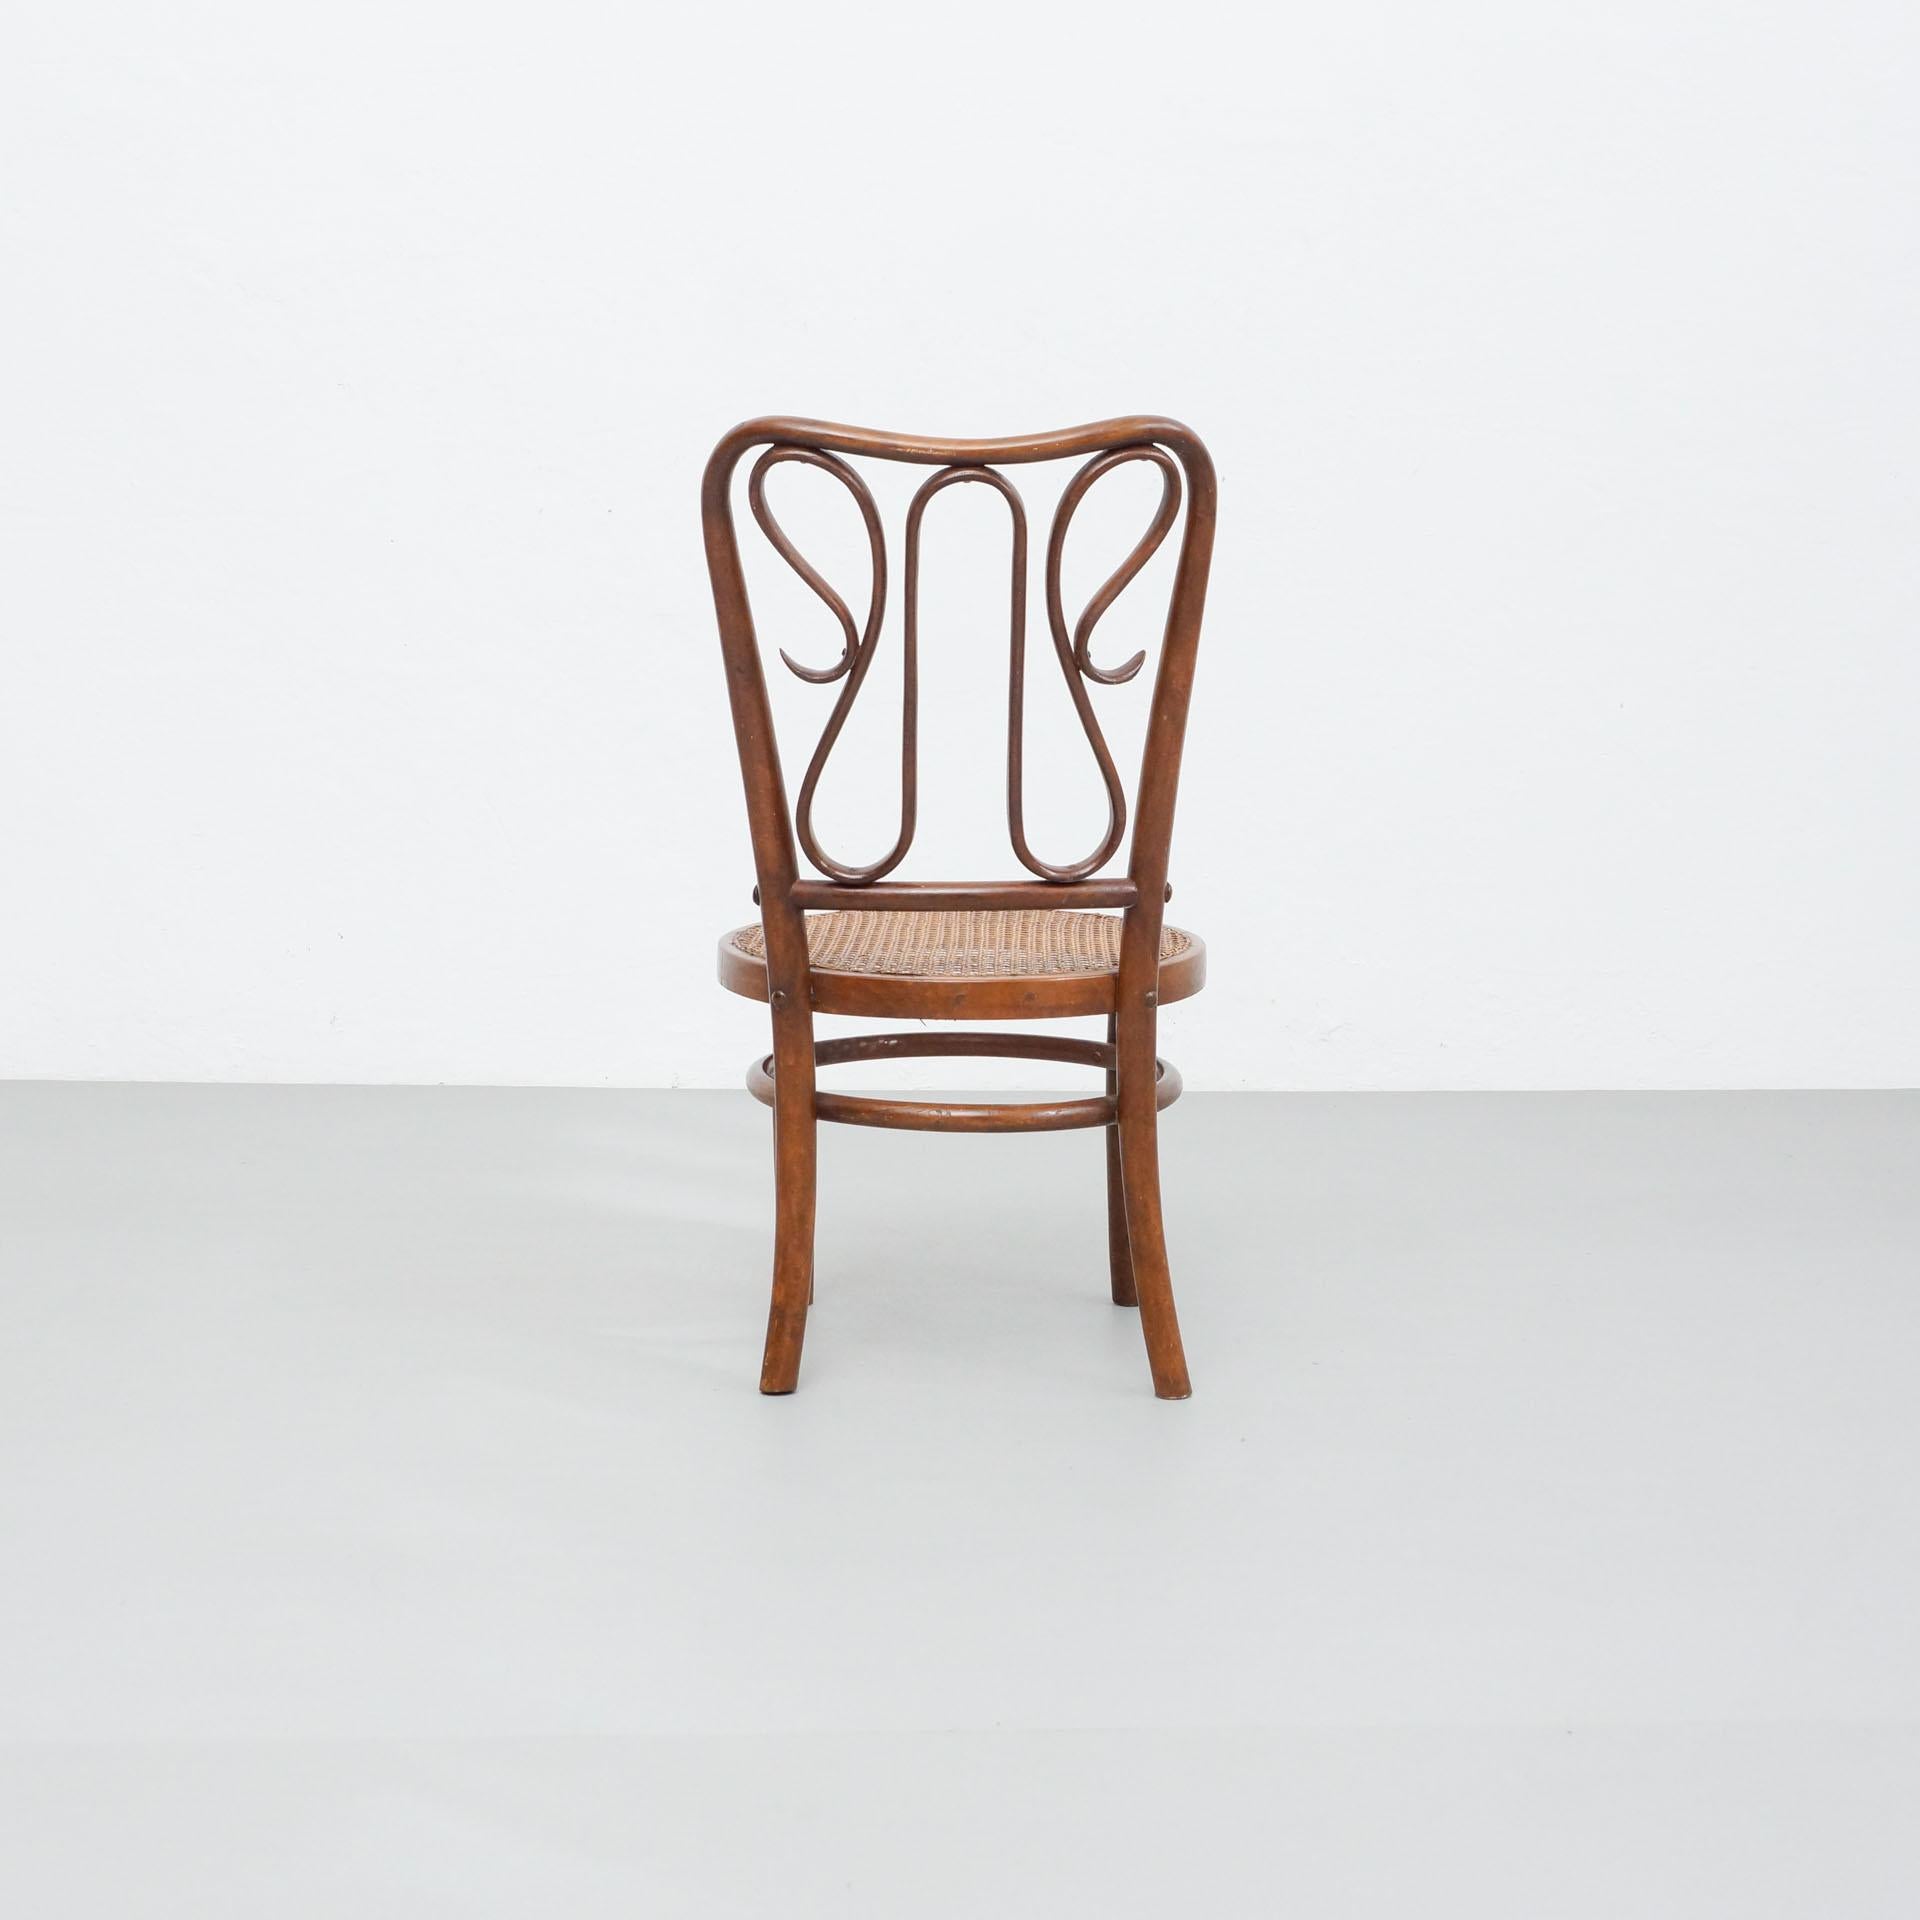 Mid-Century Modern Bentwood Chair in the Style of Thonet, Rattan and Wood, circa 1940 For Sale